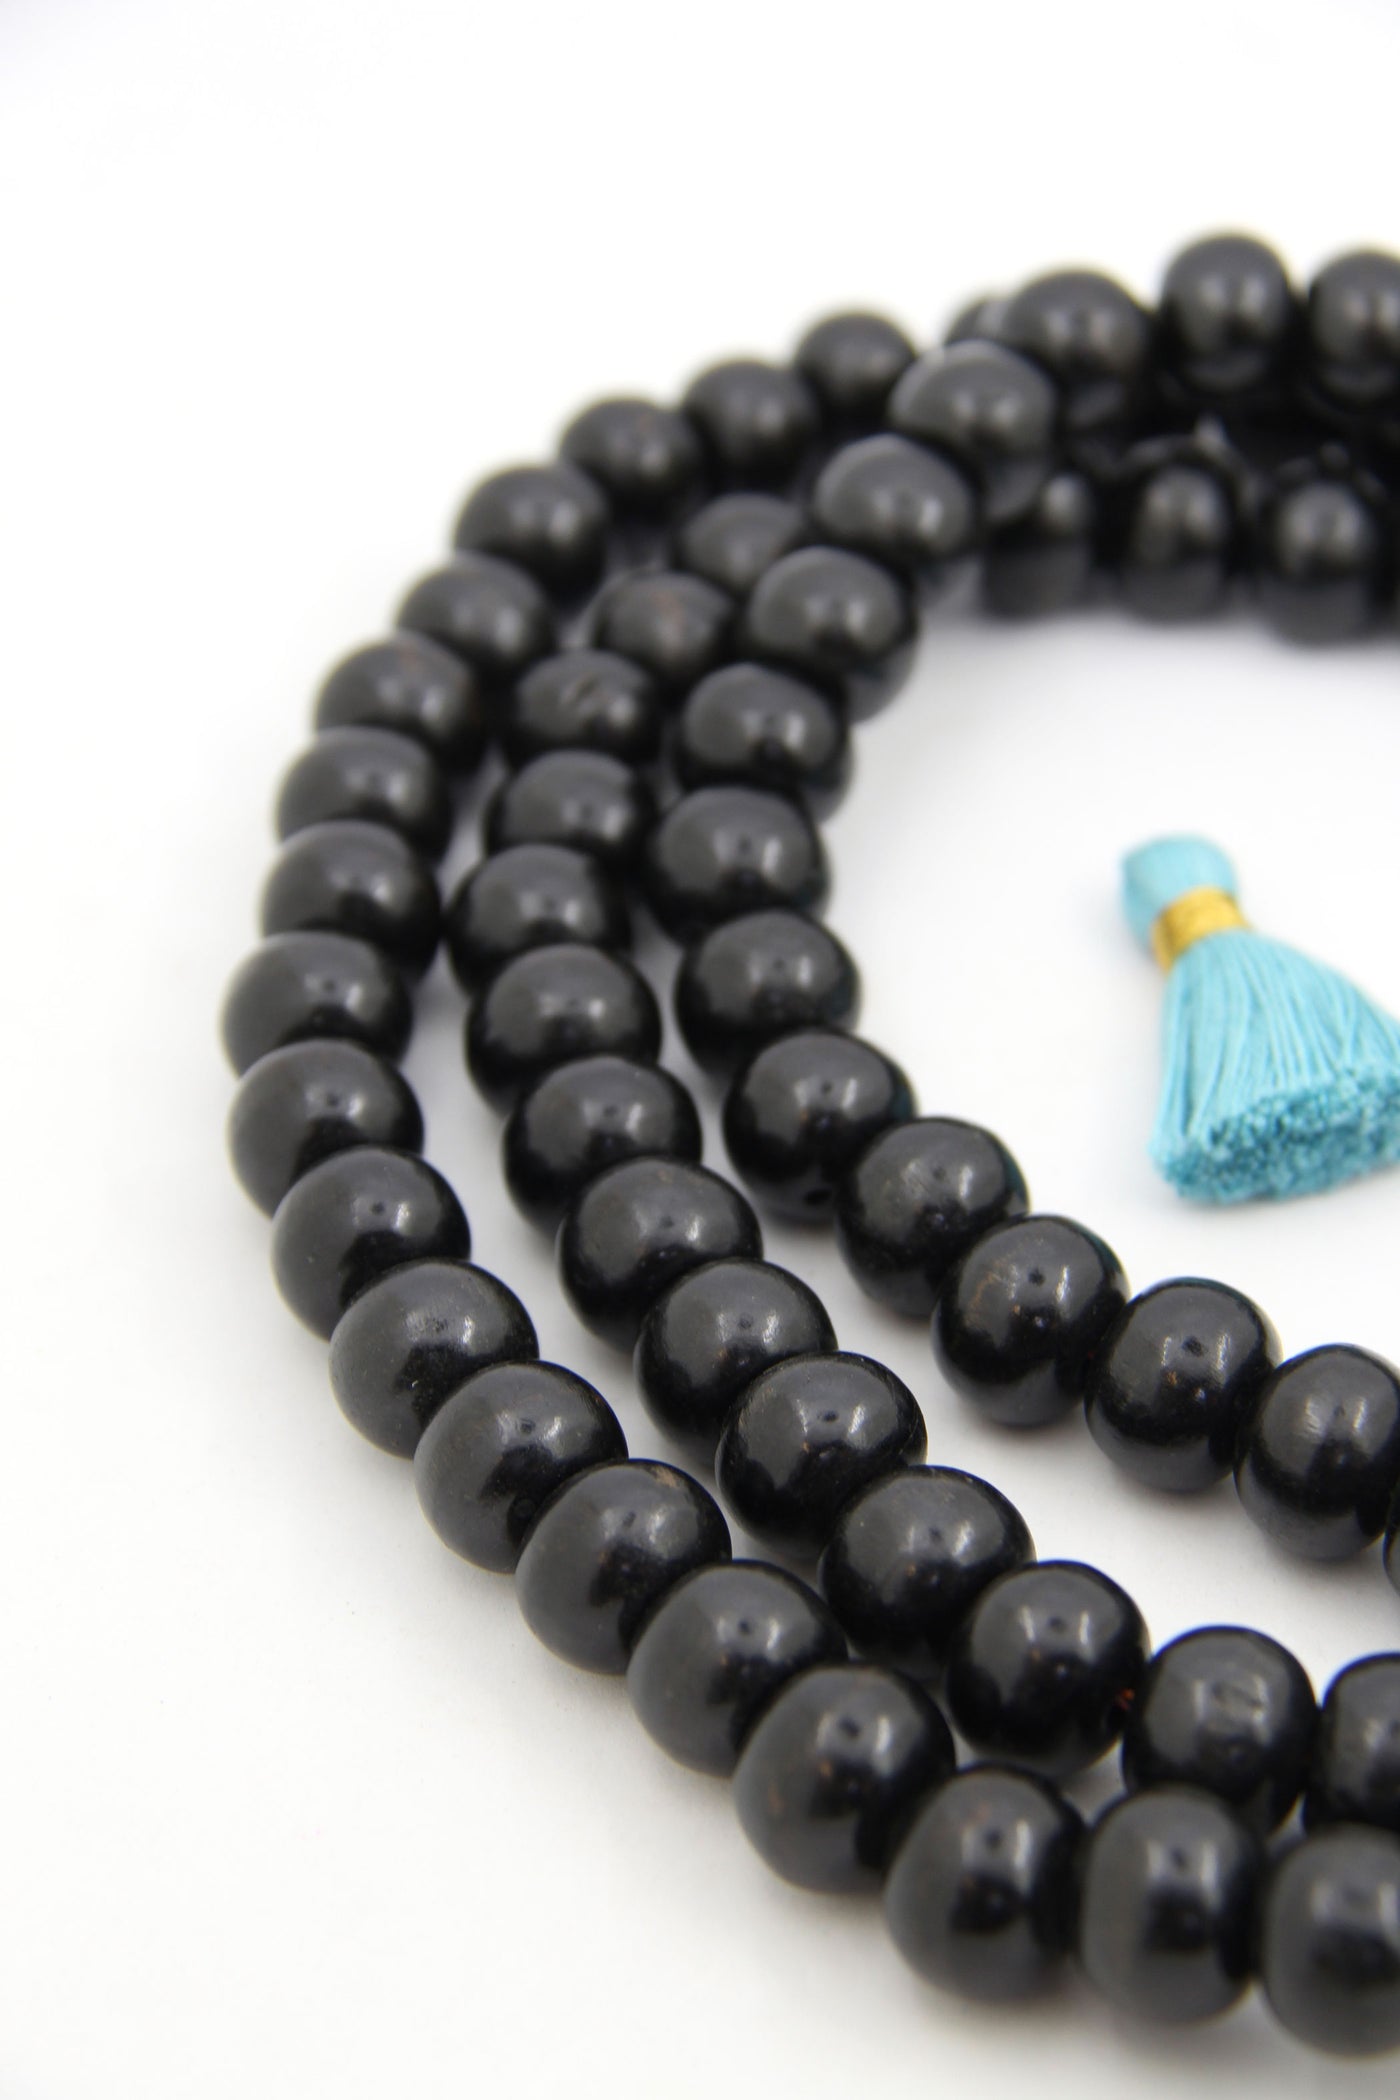 14mm Stained Wood Mala: 108 Bead Meditation Necklace